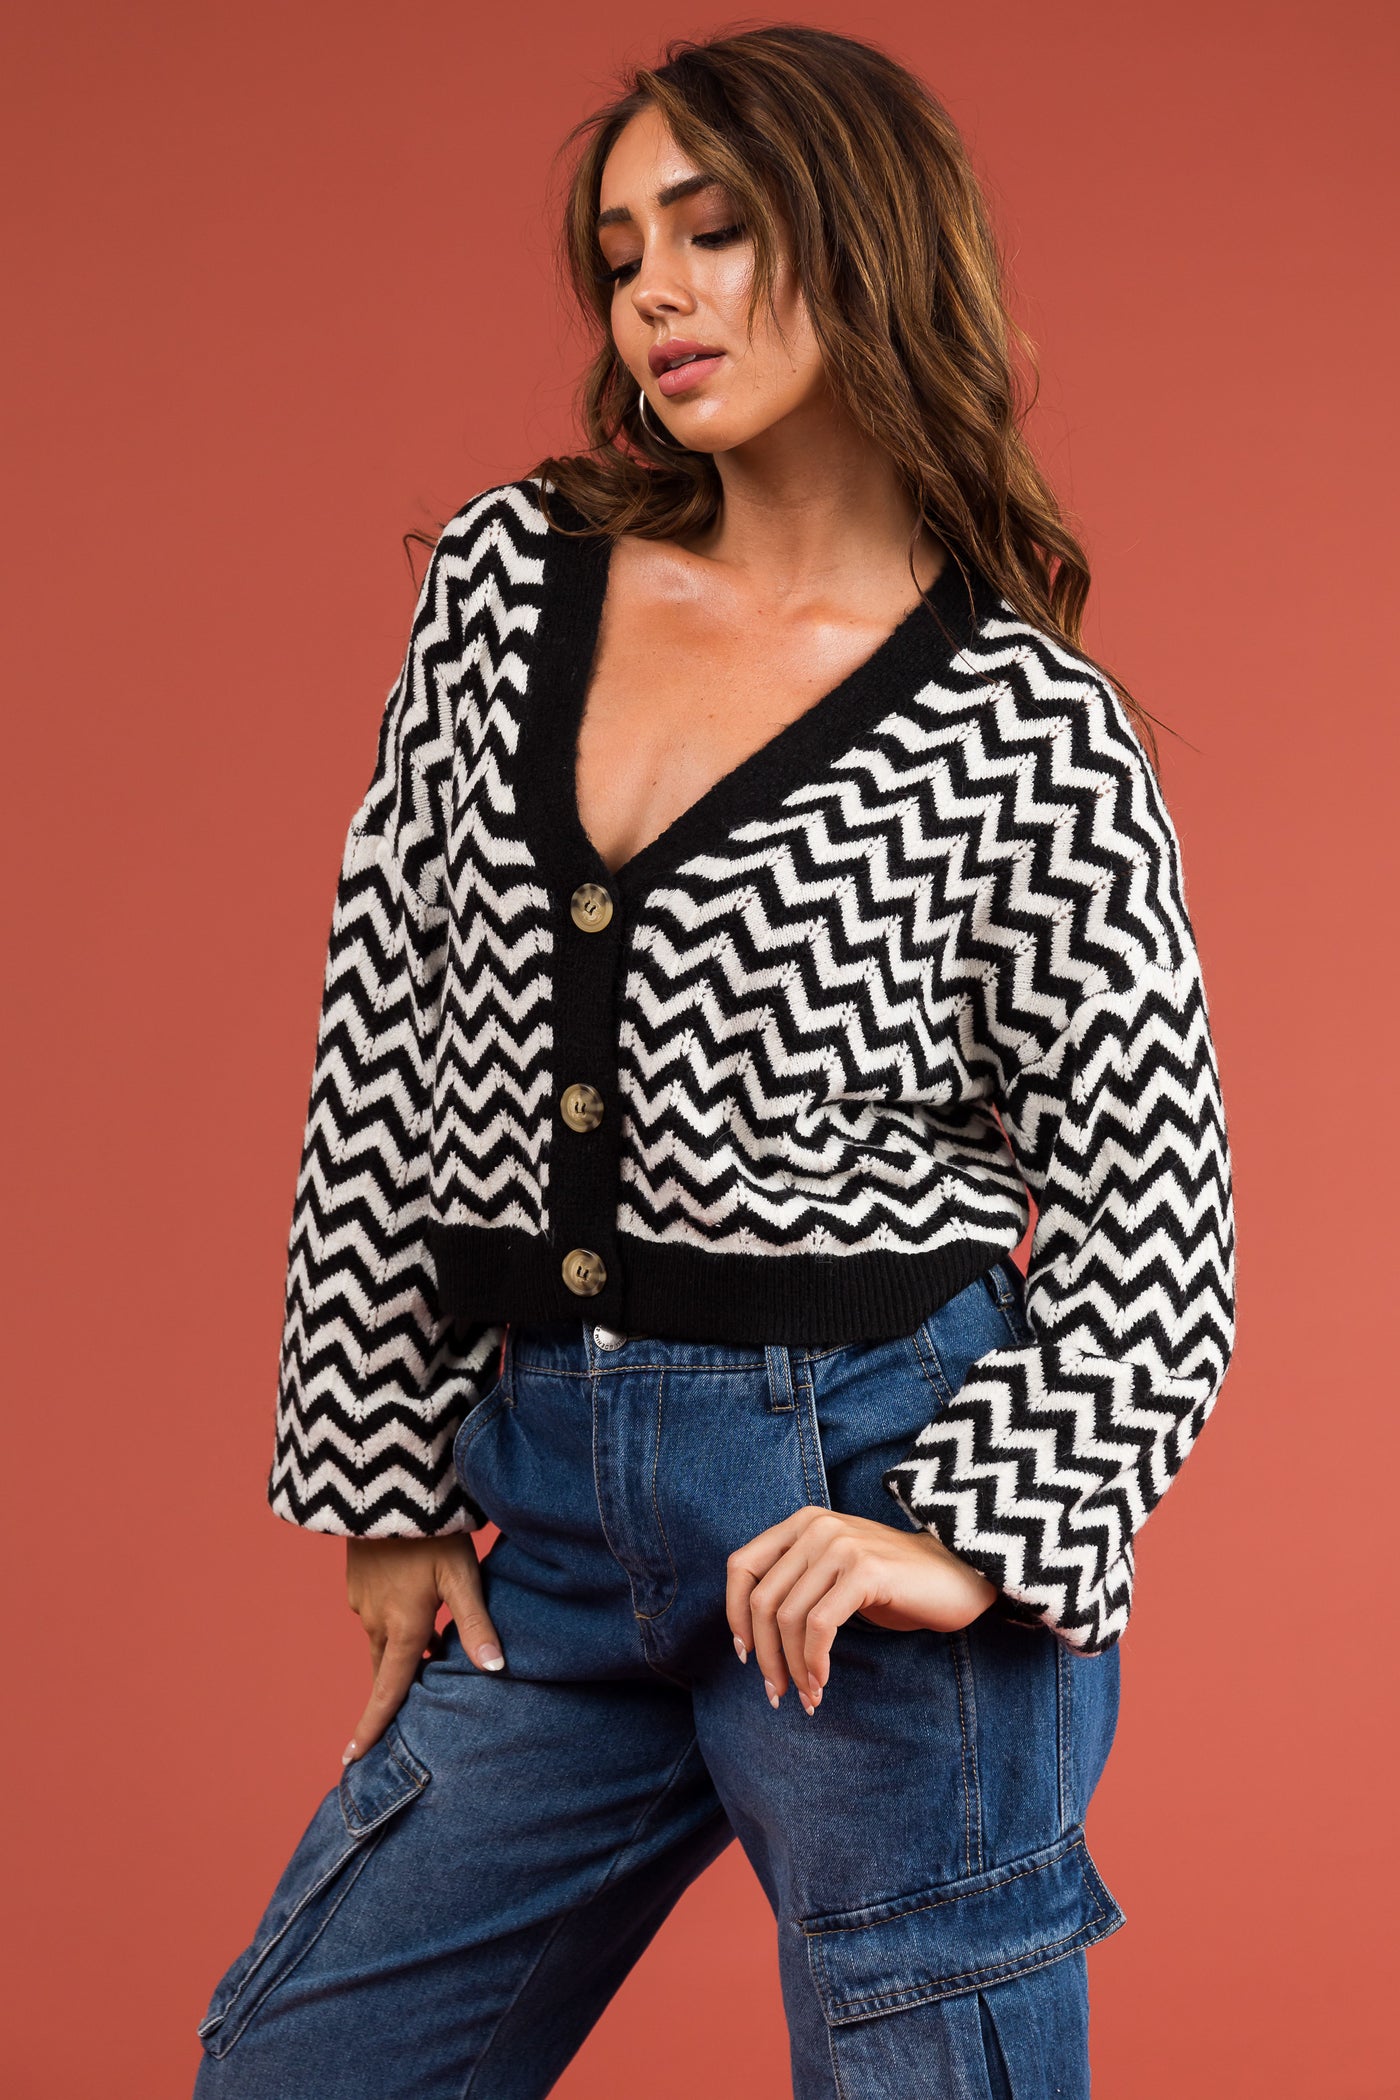 Black and White Chevron Printed Buttoned Cardigan